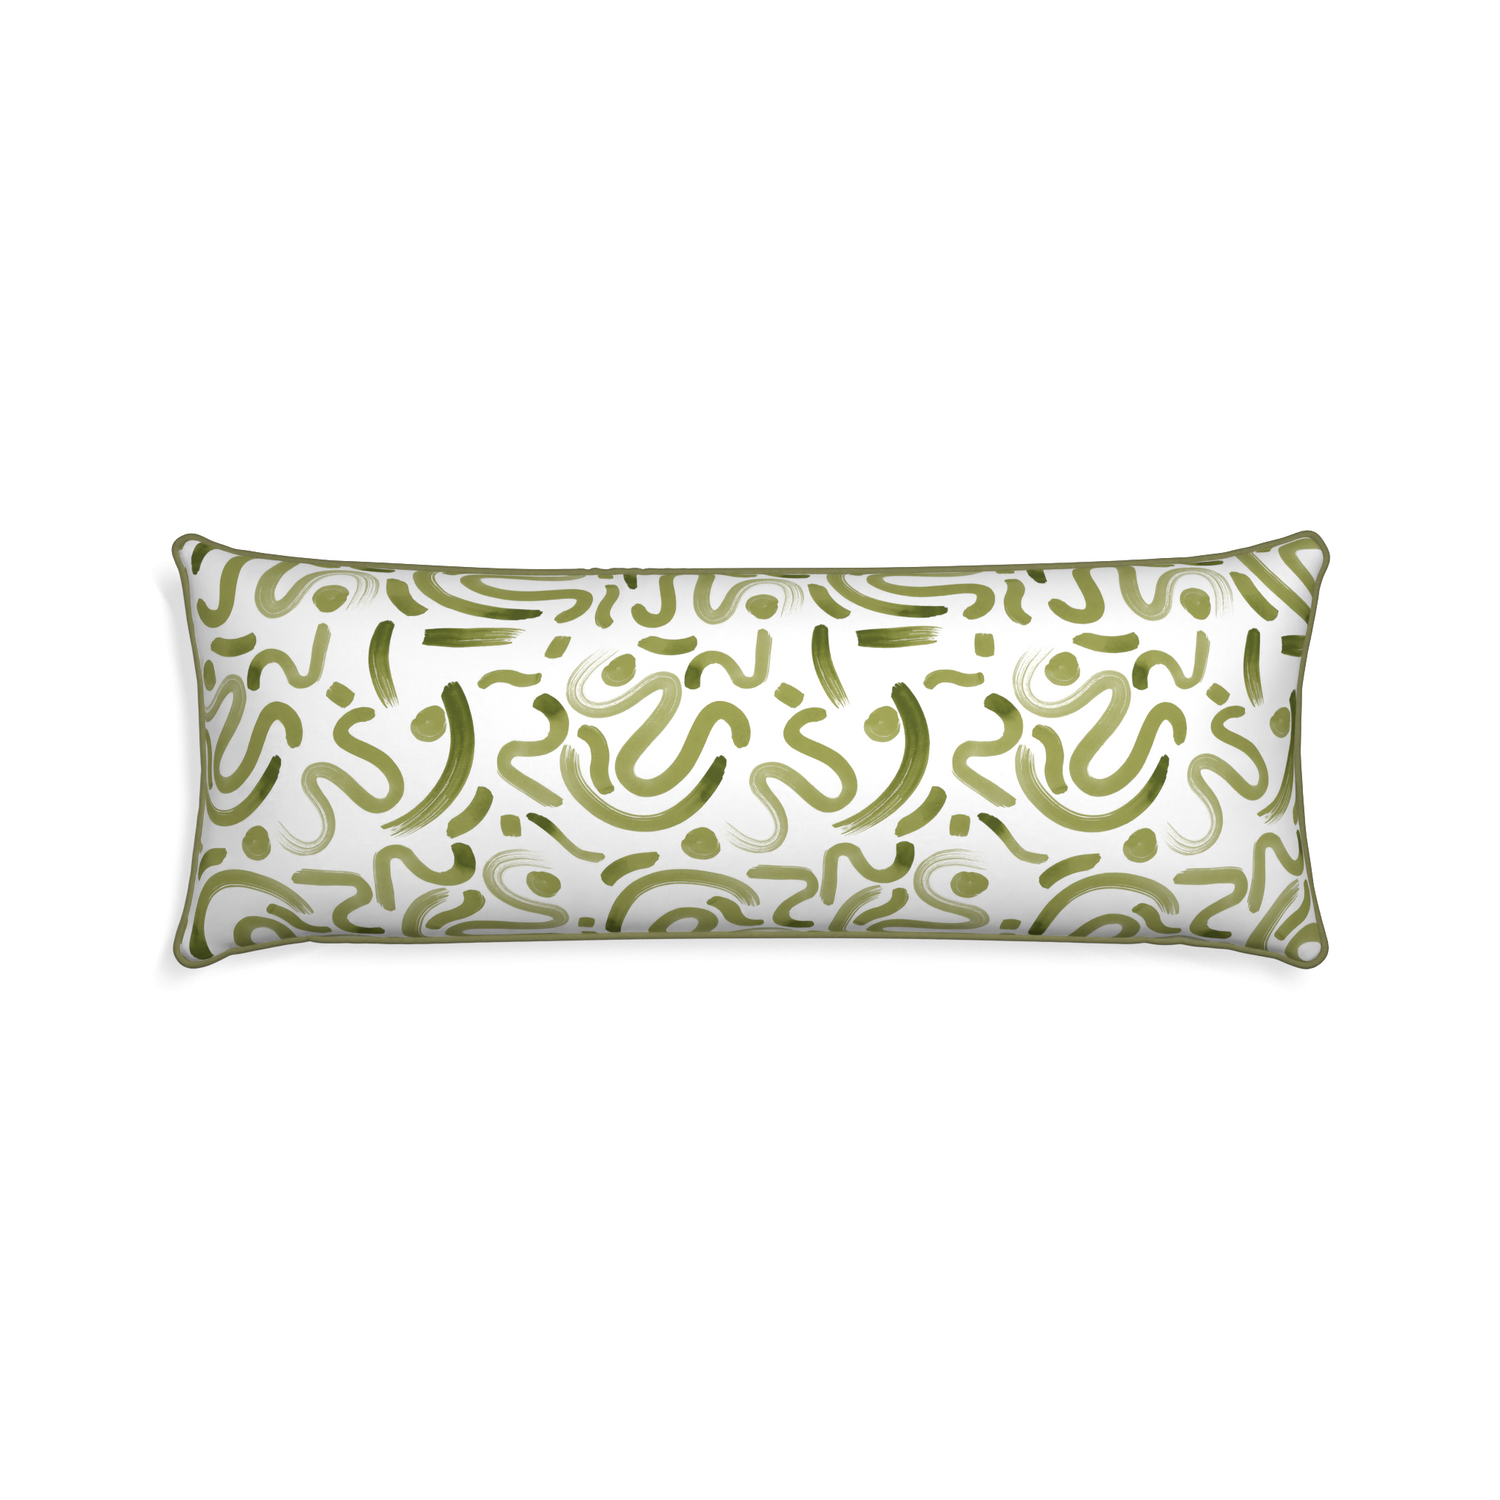 Xl-lumbar hockney moss custom pillow with moss piping on white background